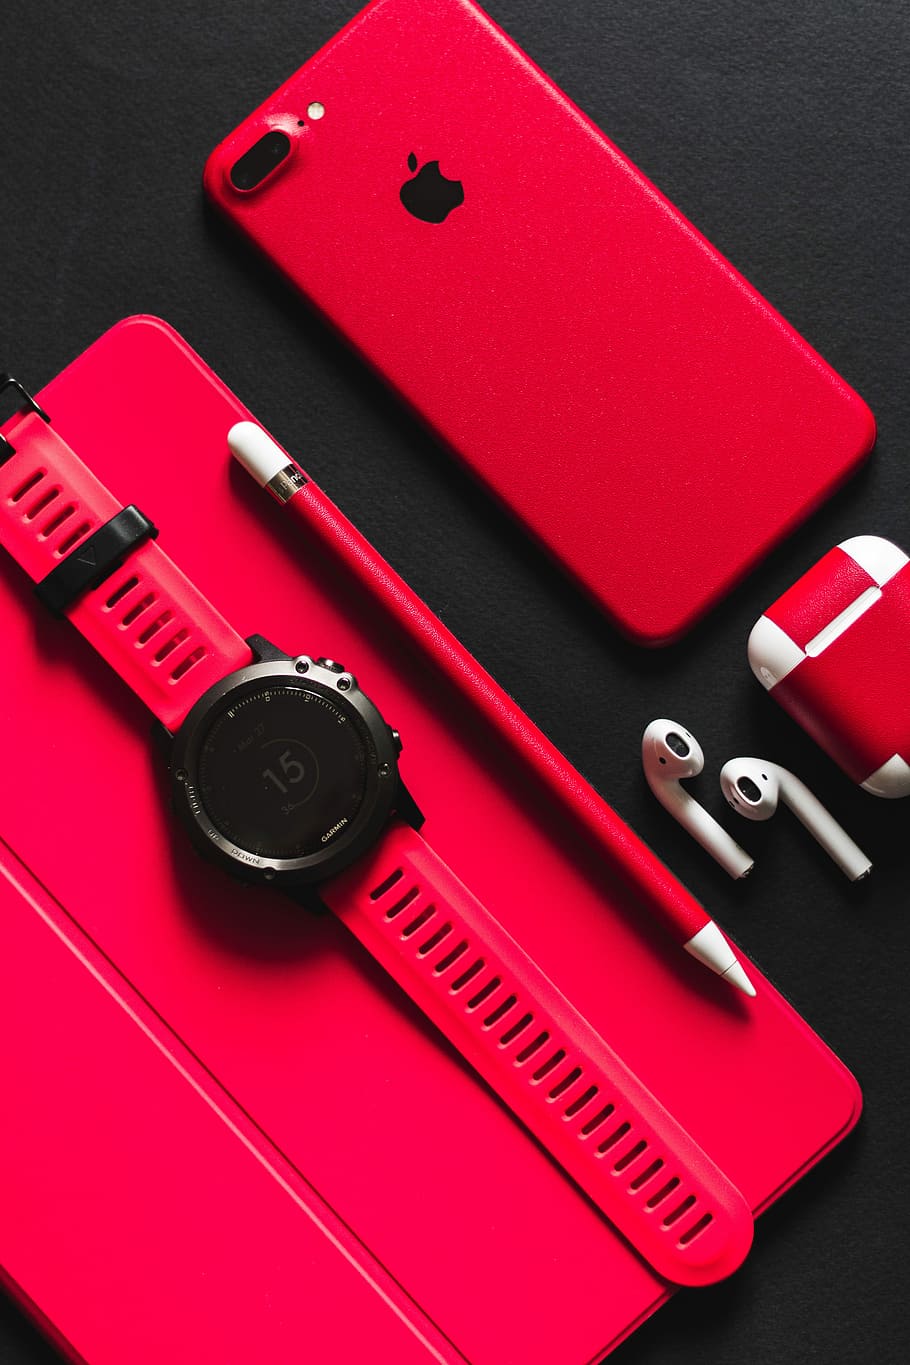 smartwatch, stylus, AirPods, and product red iPhone 7 on black surface, PRODUCT RED iPhone 7 Plus, AirPods, watch, and Apple Pencil on black surface, HD wallpaper